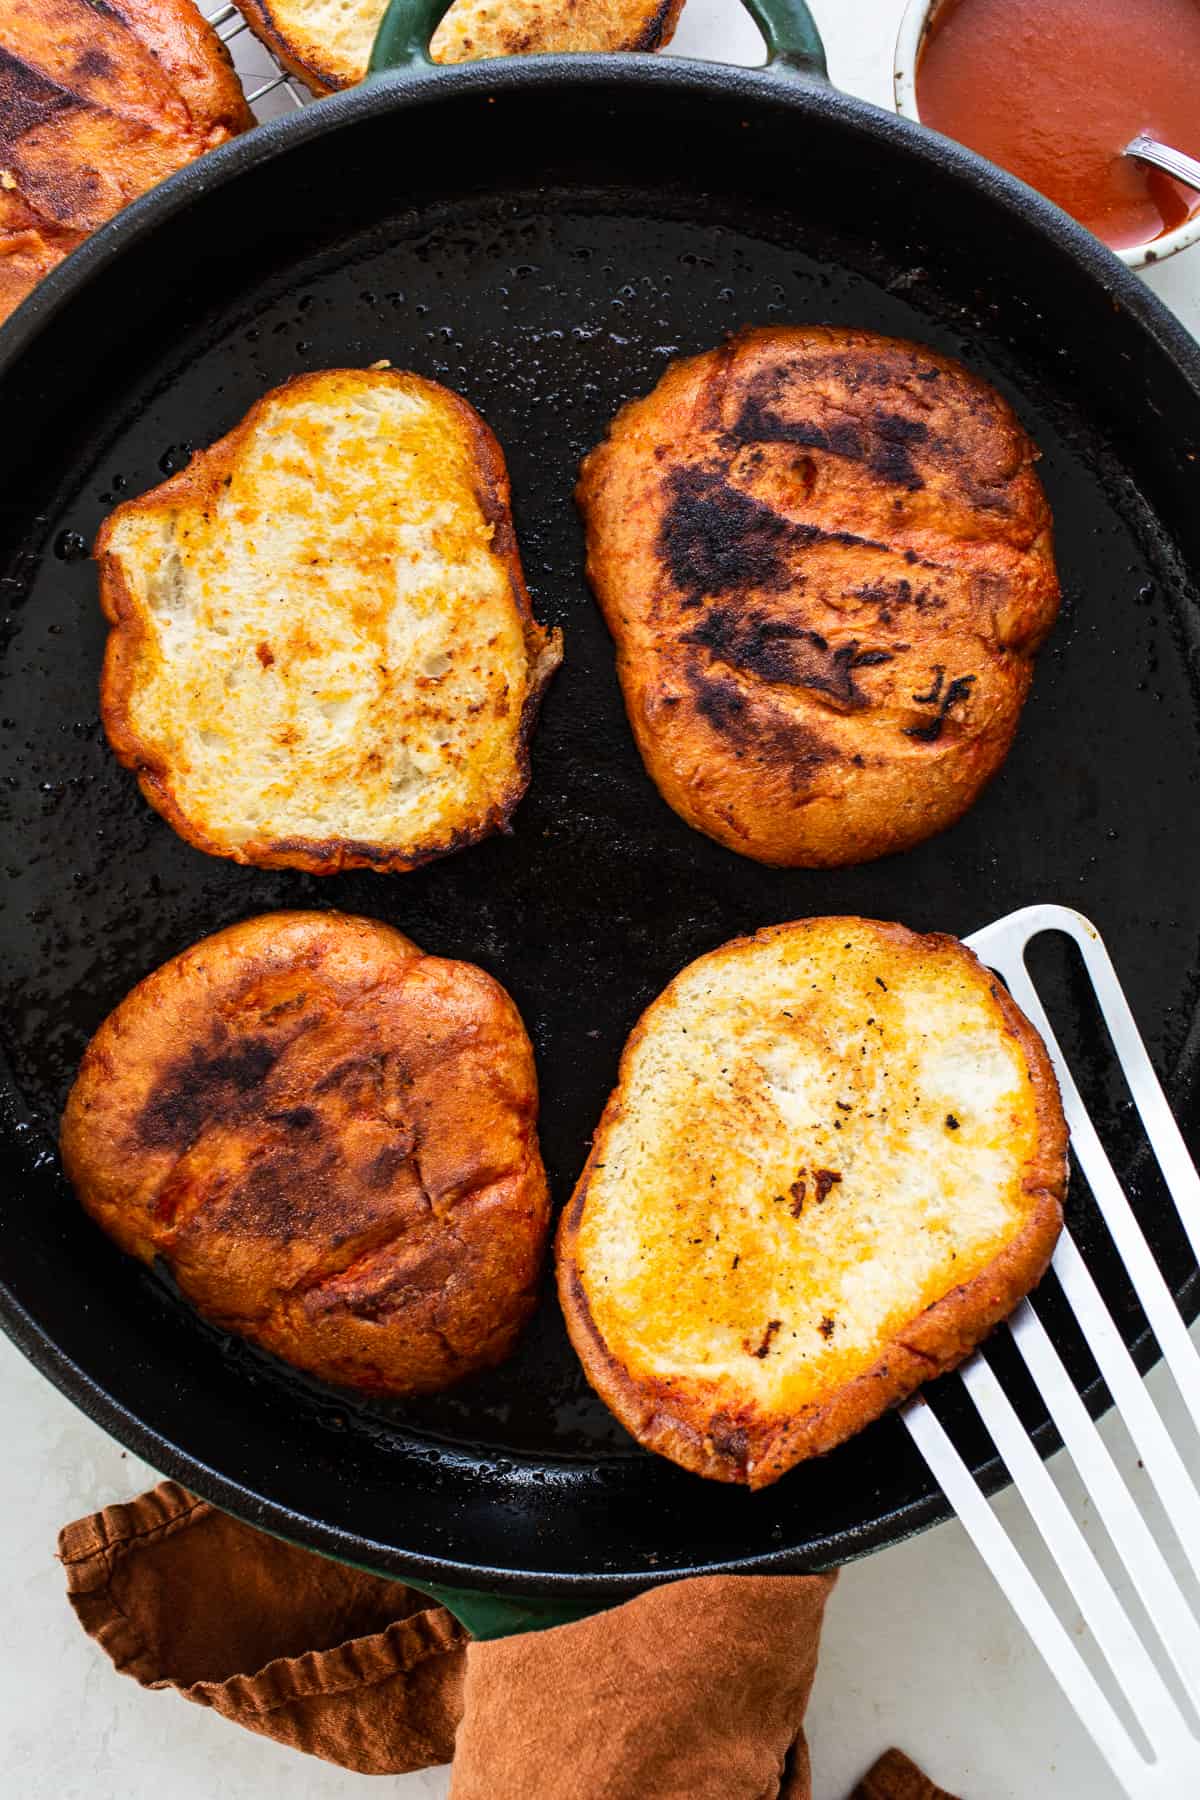 Telera bread being pan-fried in a skillet with a red chile sauce.